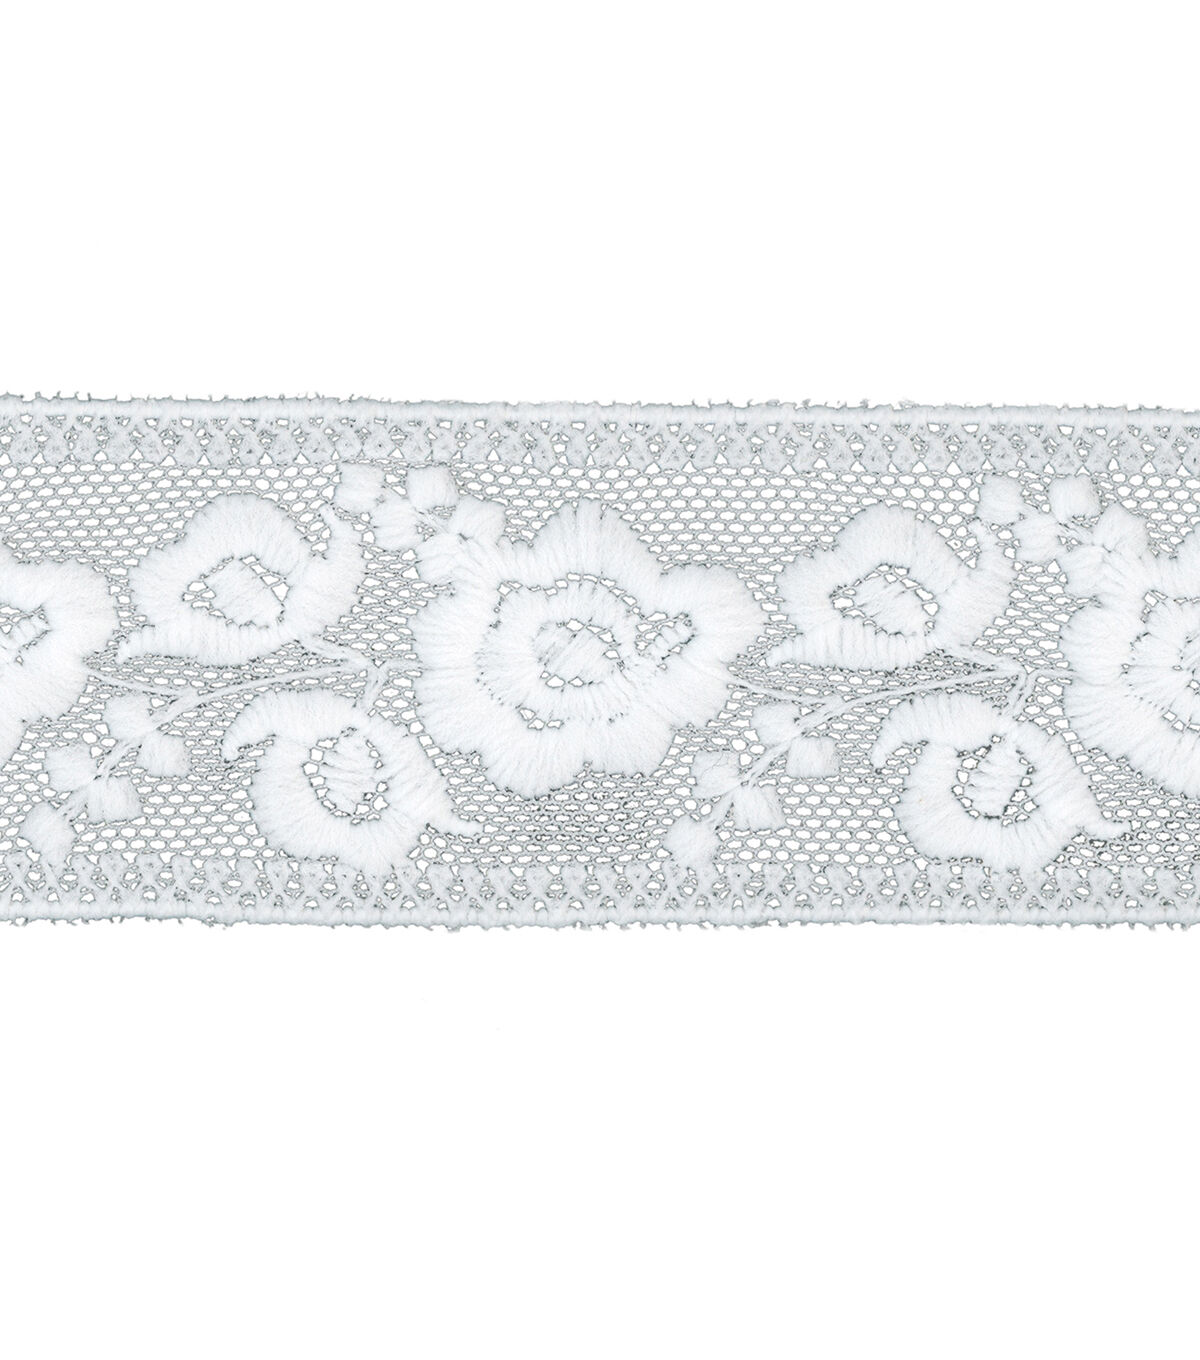 Simplicity Trim, White 1 1/4 inch Embroidered Lace Mesh with